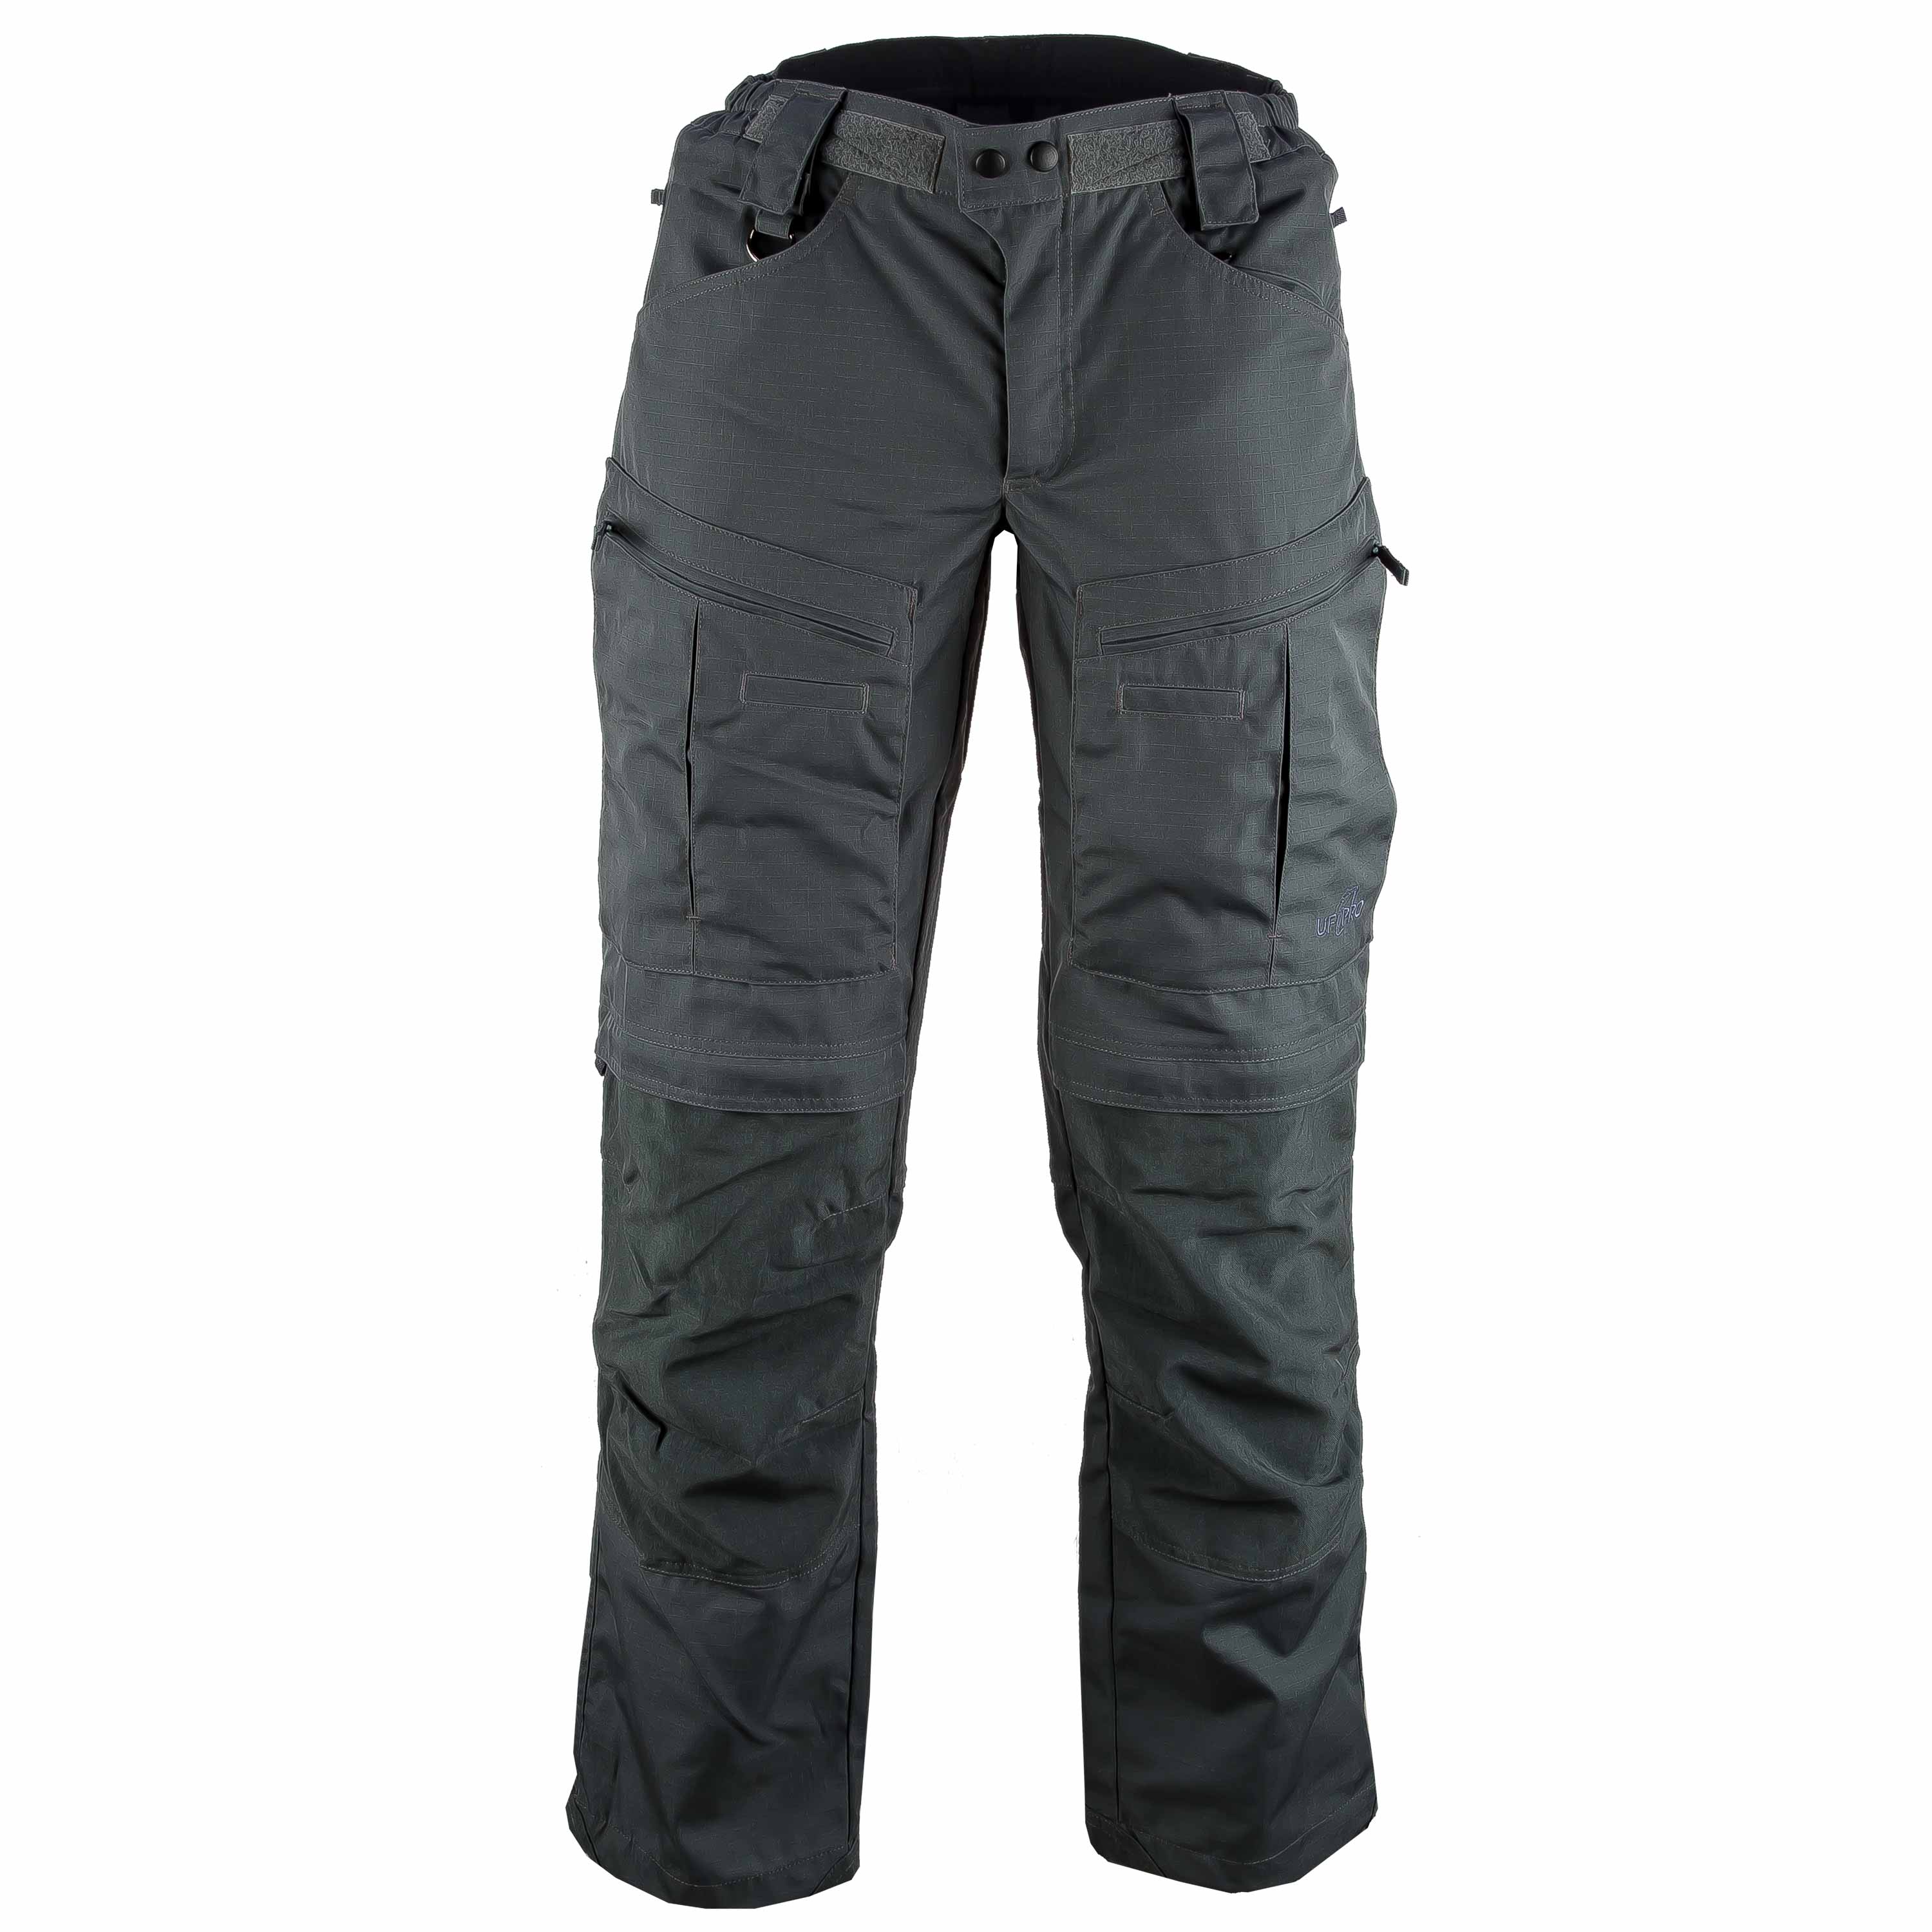 Purchase the UF Pro P-40 Tac-2 Pants steel gray by ASMC